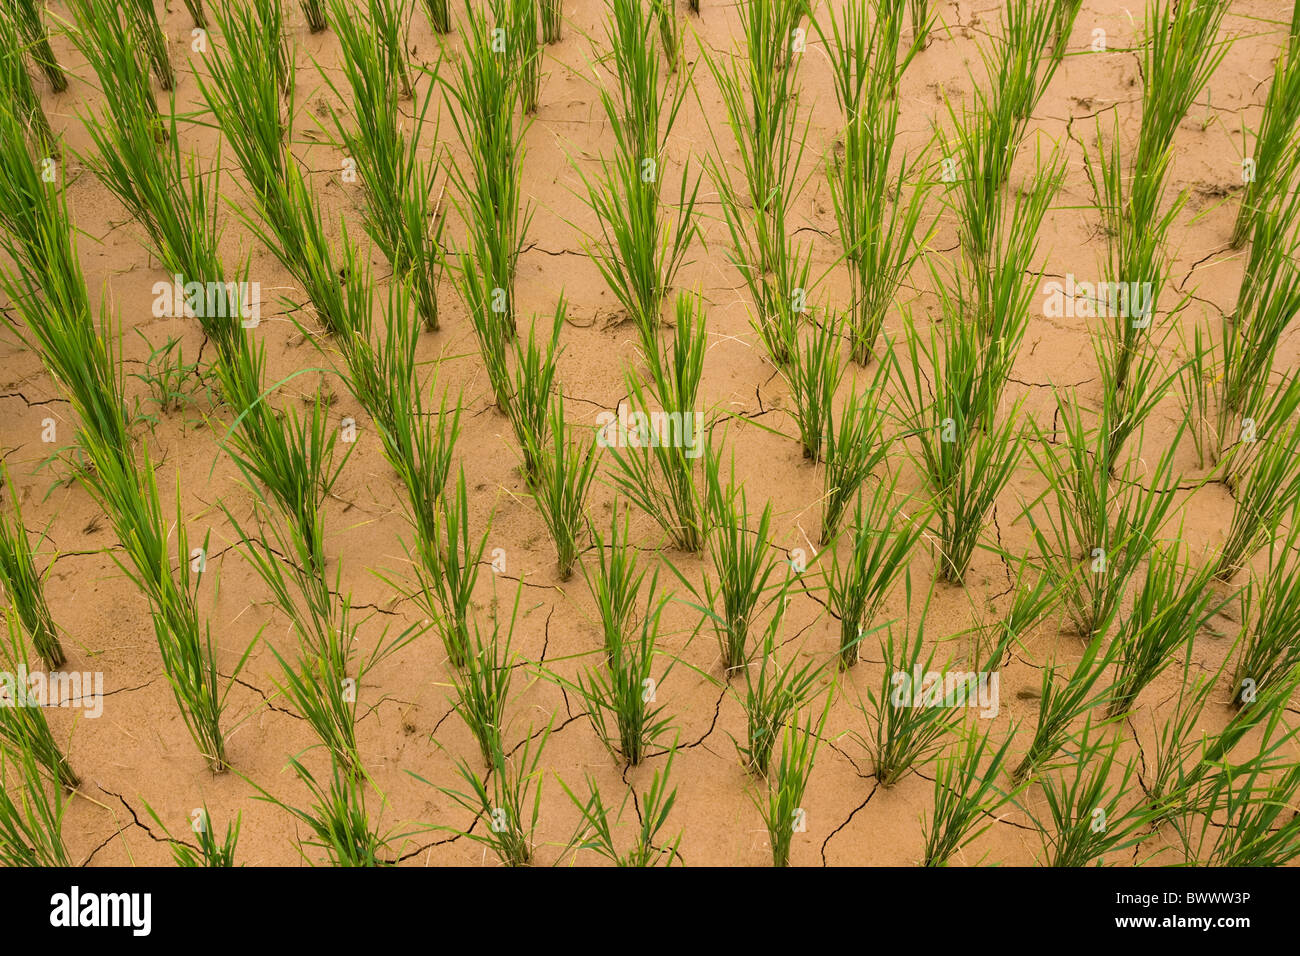 Dry mud rice paddy plants from above Stock Photo